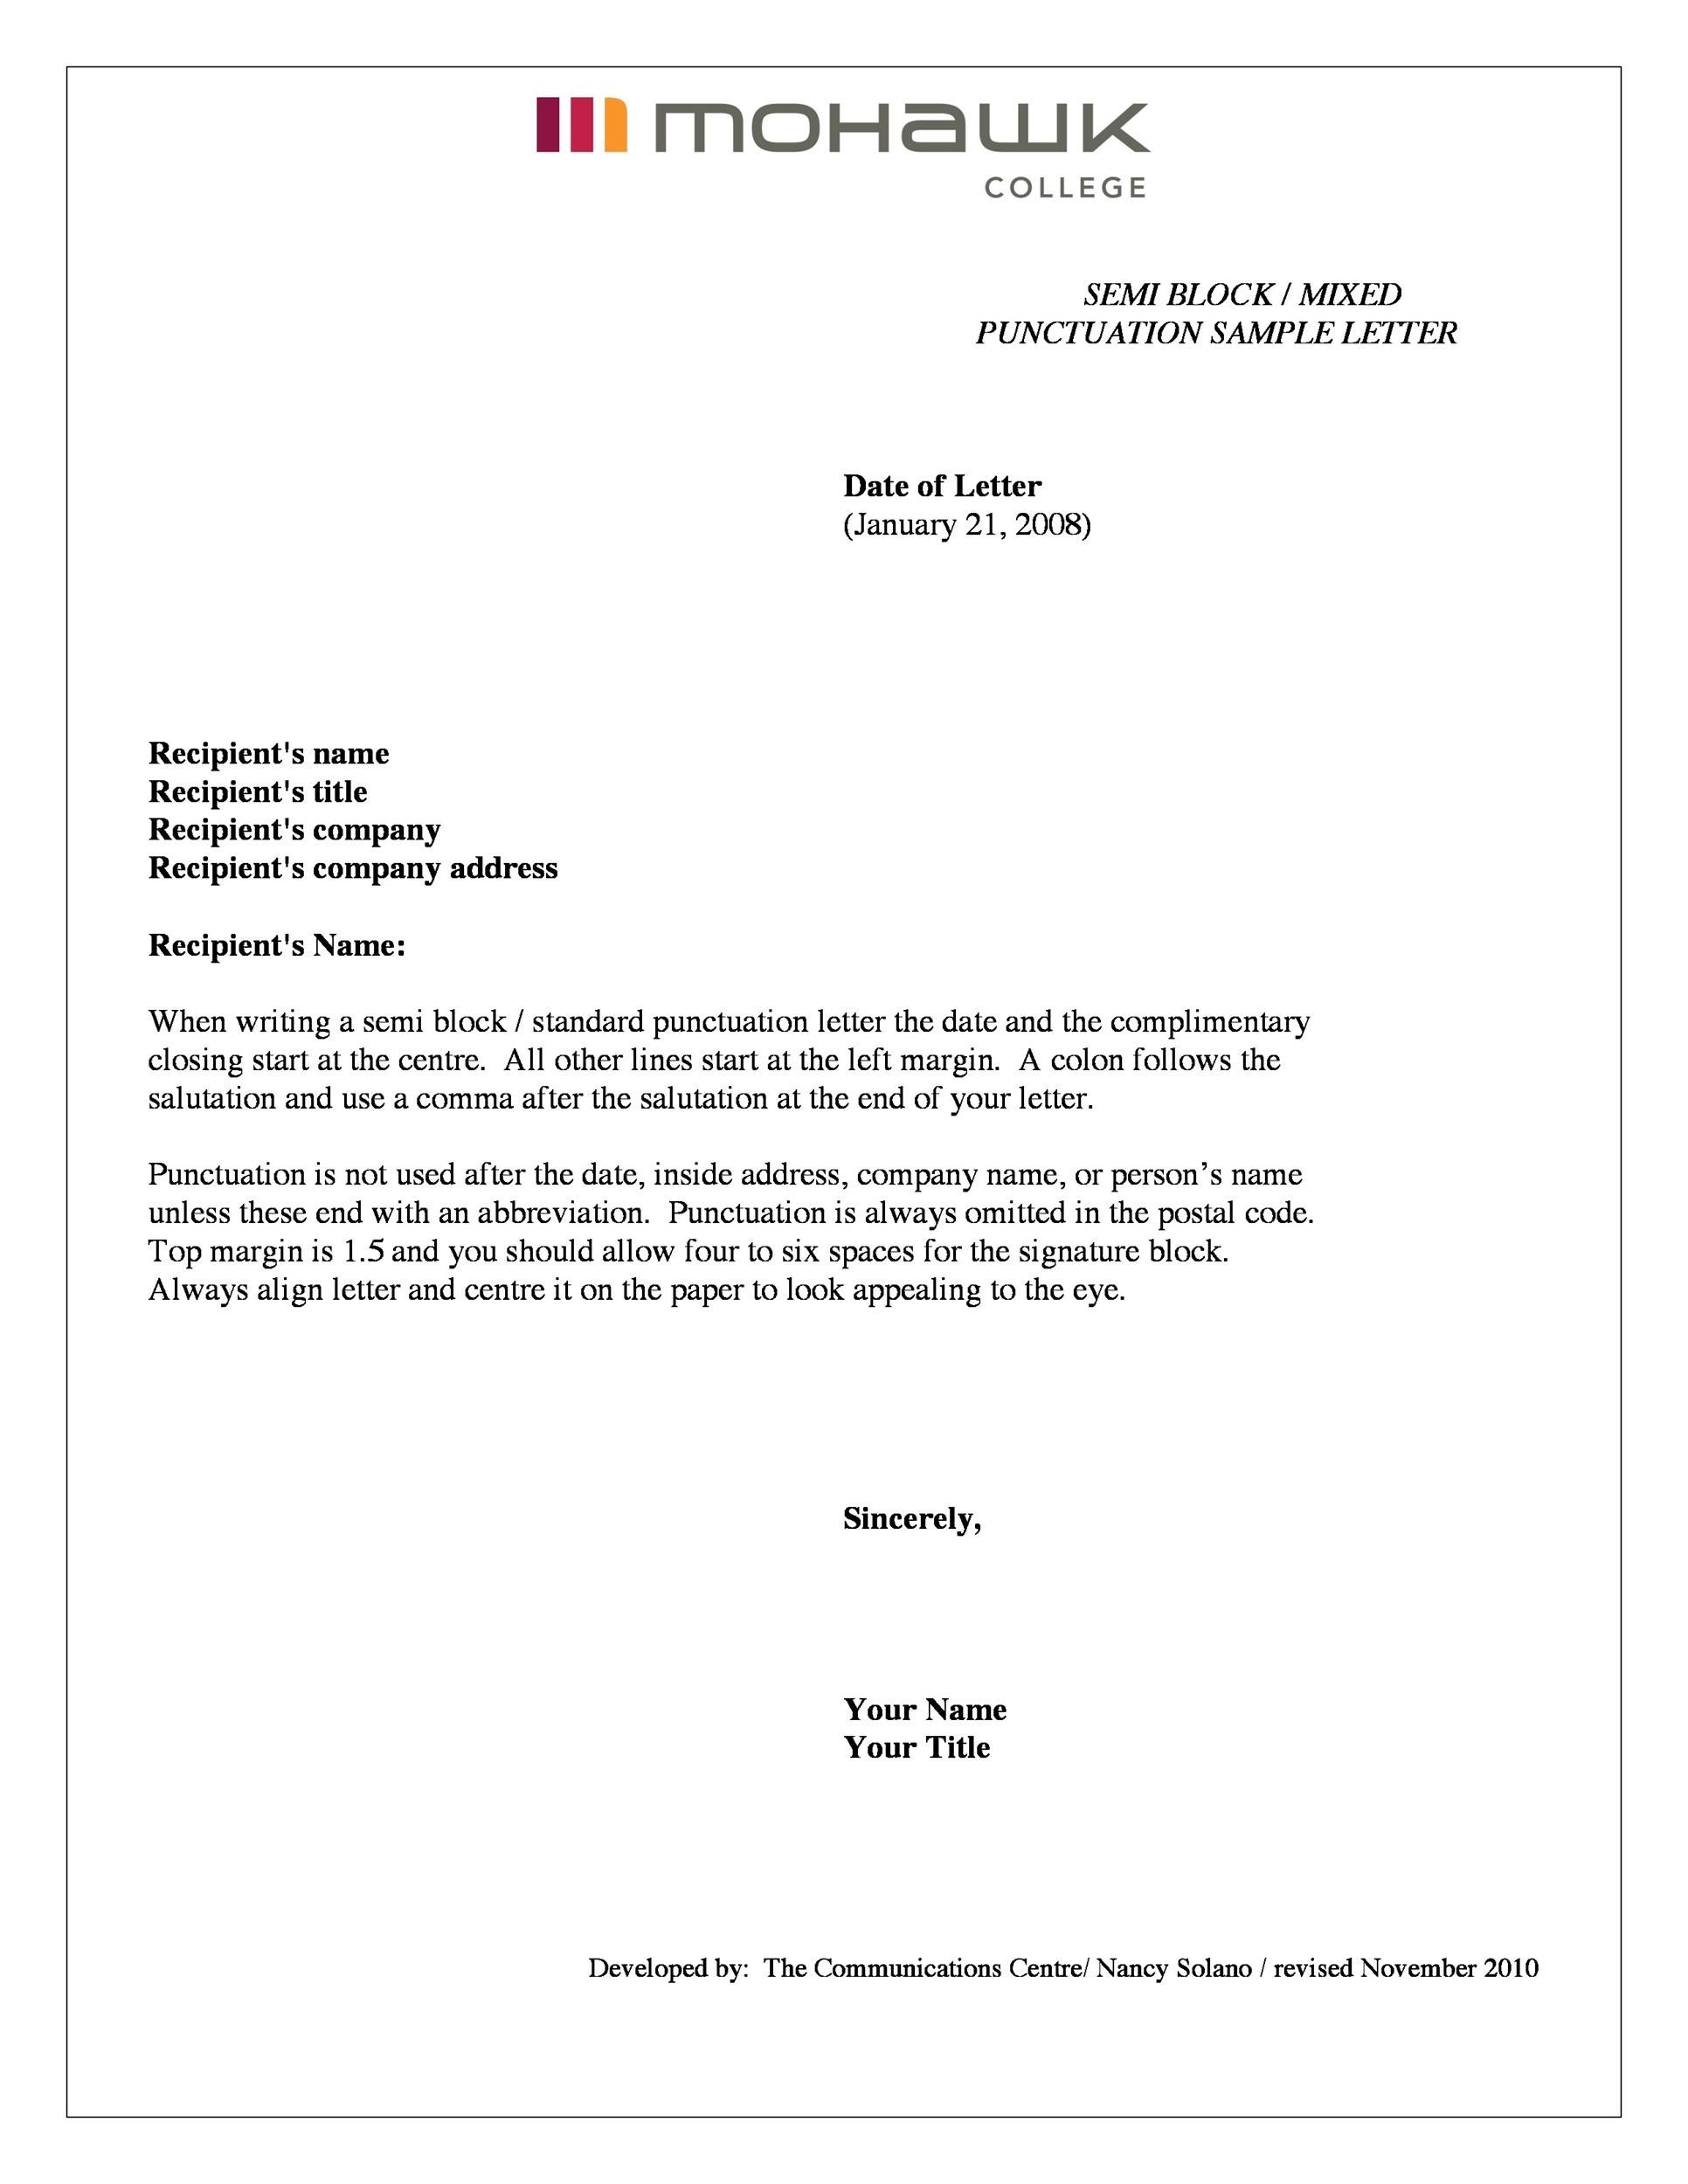 A Formal Letter Formal Letter Formal Letter Writing | Images and Photos ...